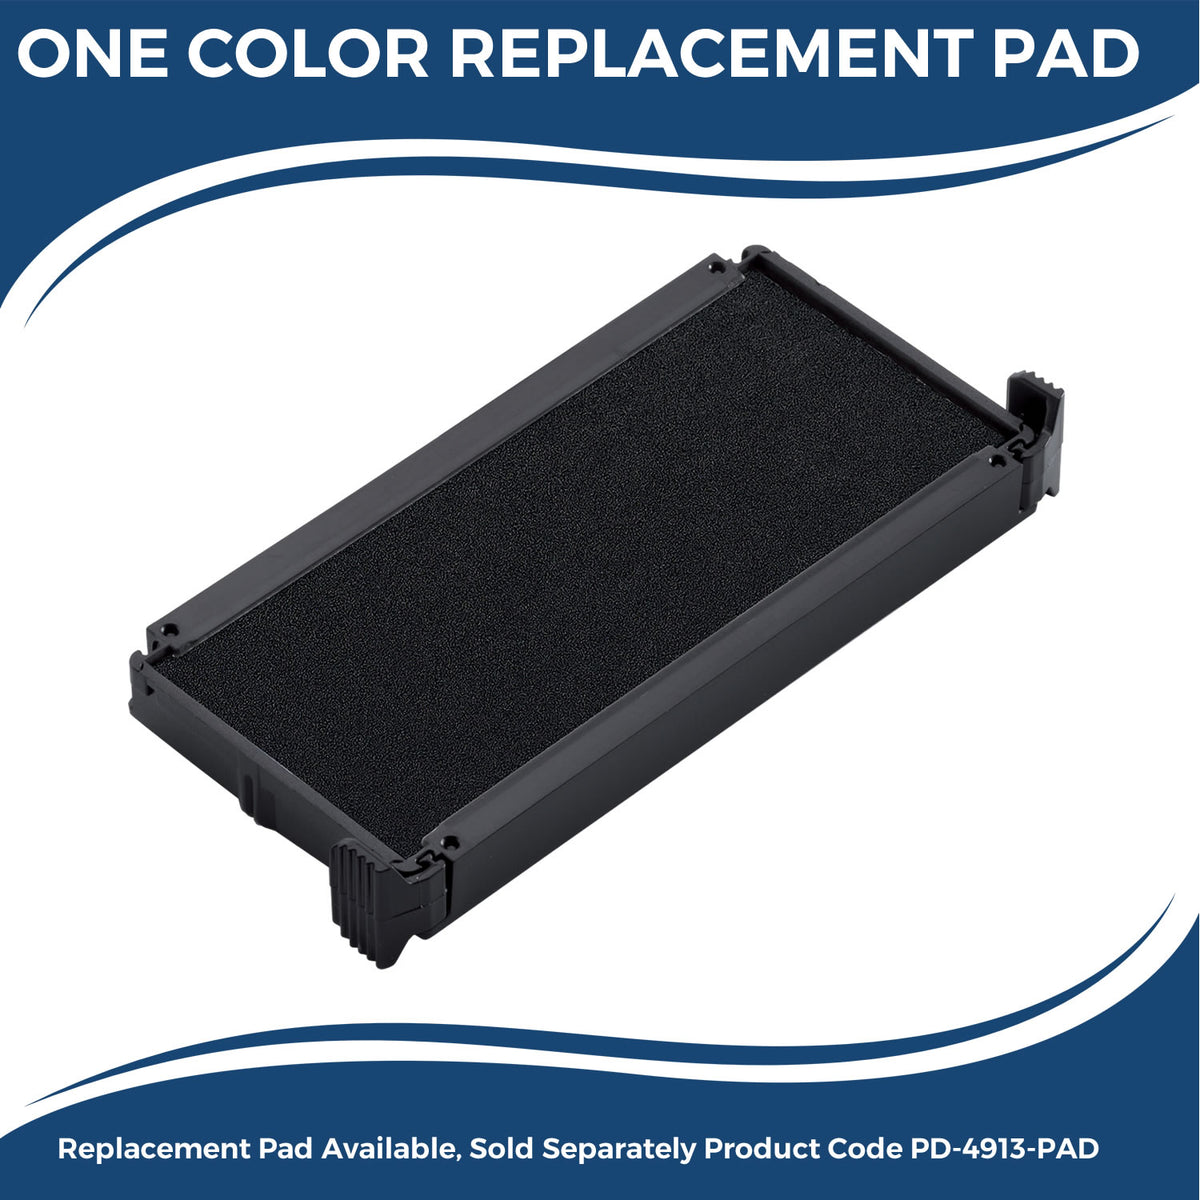 Large Self-Inking Bold FYI Stamp 4972S Large Replacment Pad